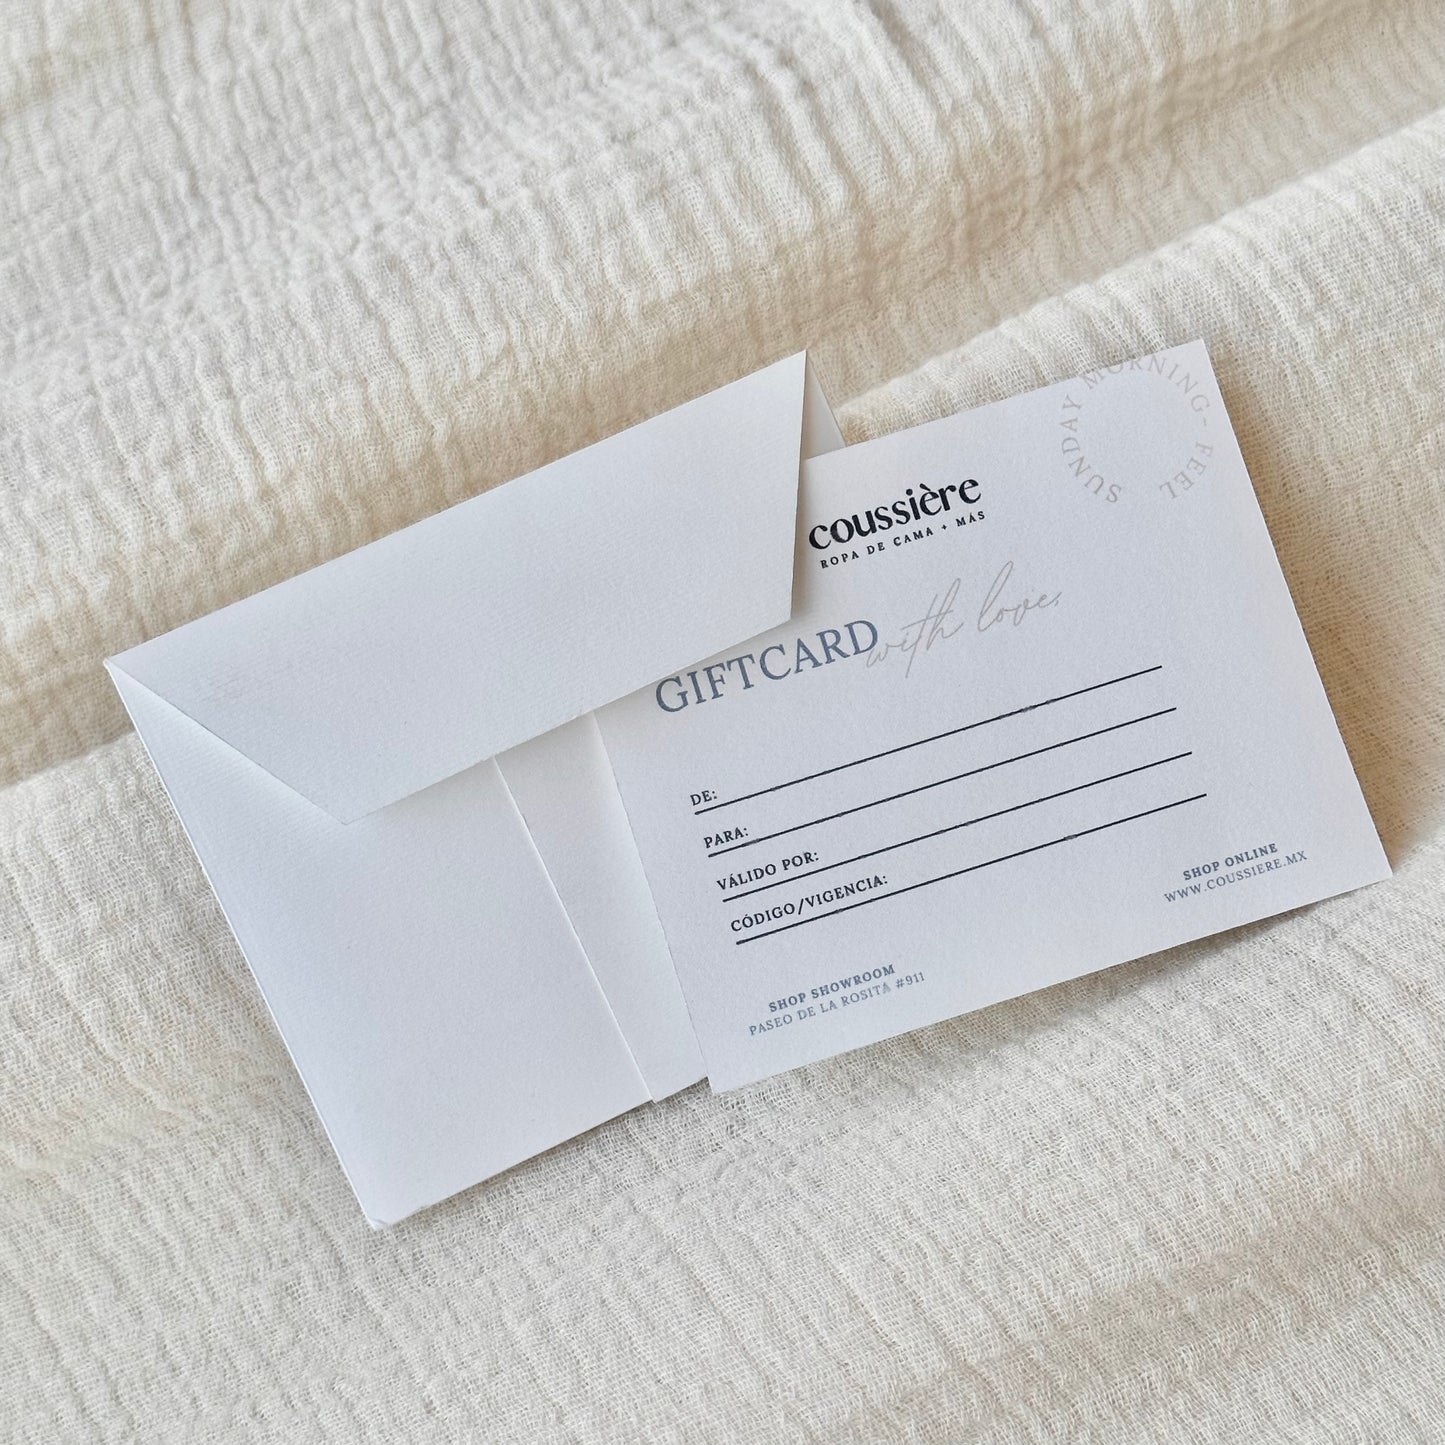 Coussière Giftcard